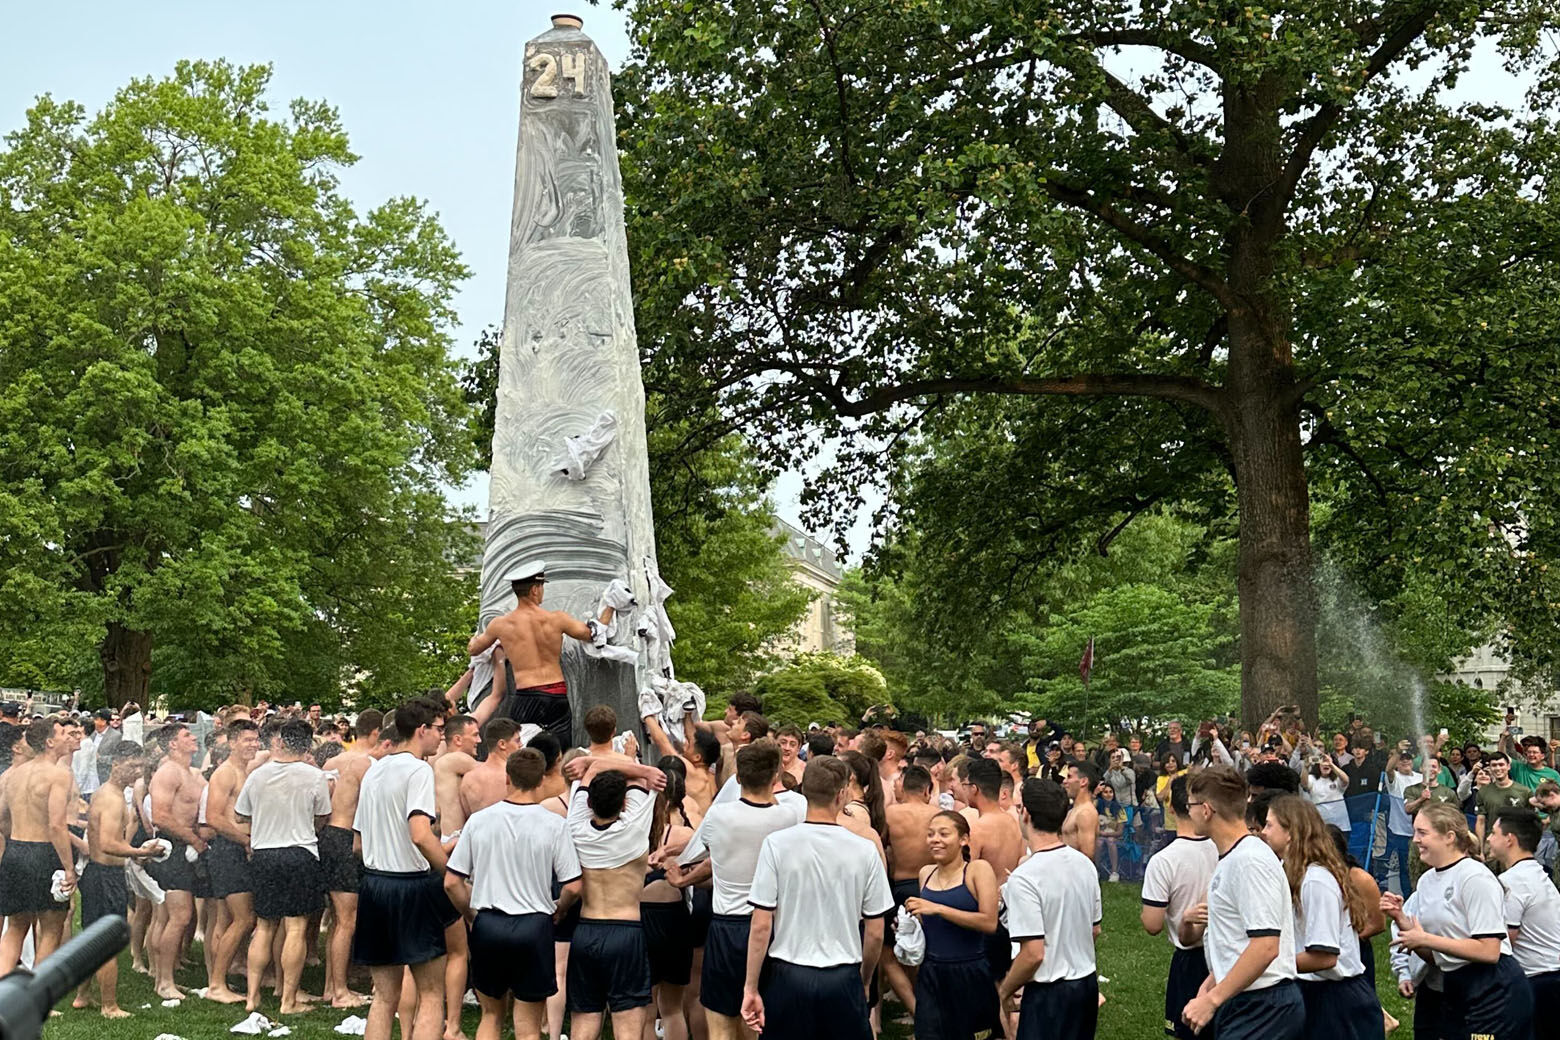 The class of 2026 at the US Naval Academy completing the Herndon Climb (WTOP/Matt Kaufax)